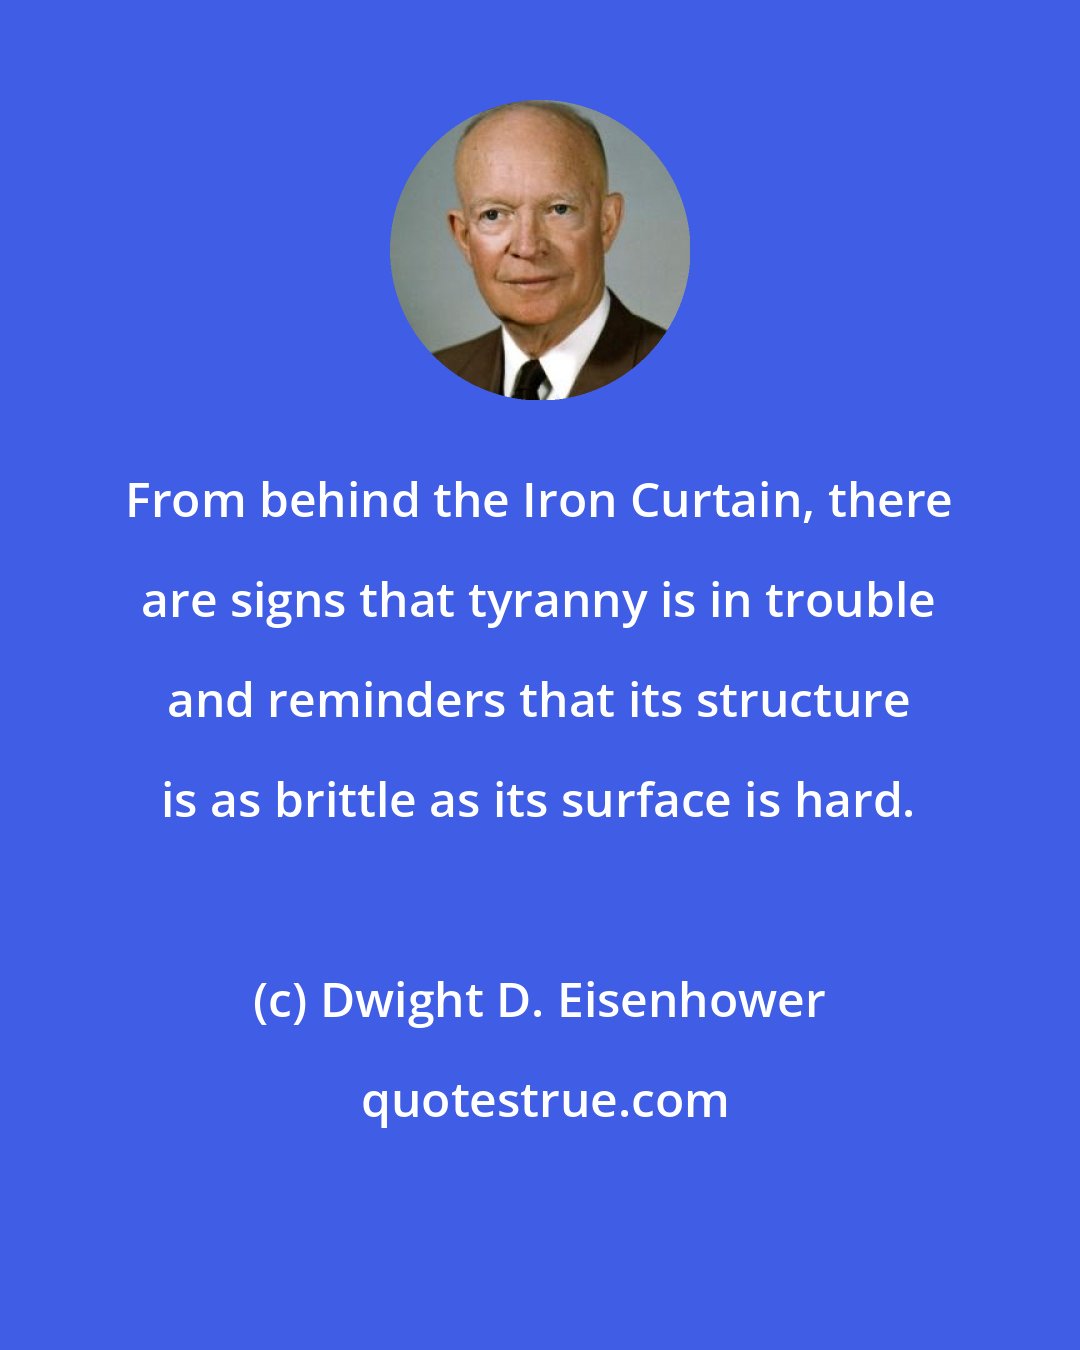 Dwight D. Eisenhower: From behind the Iron Curtain, there are signs that tyranny is in trouble and reminders that its structure is as brittle as its surface is hard.